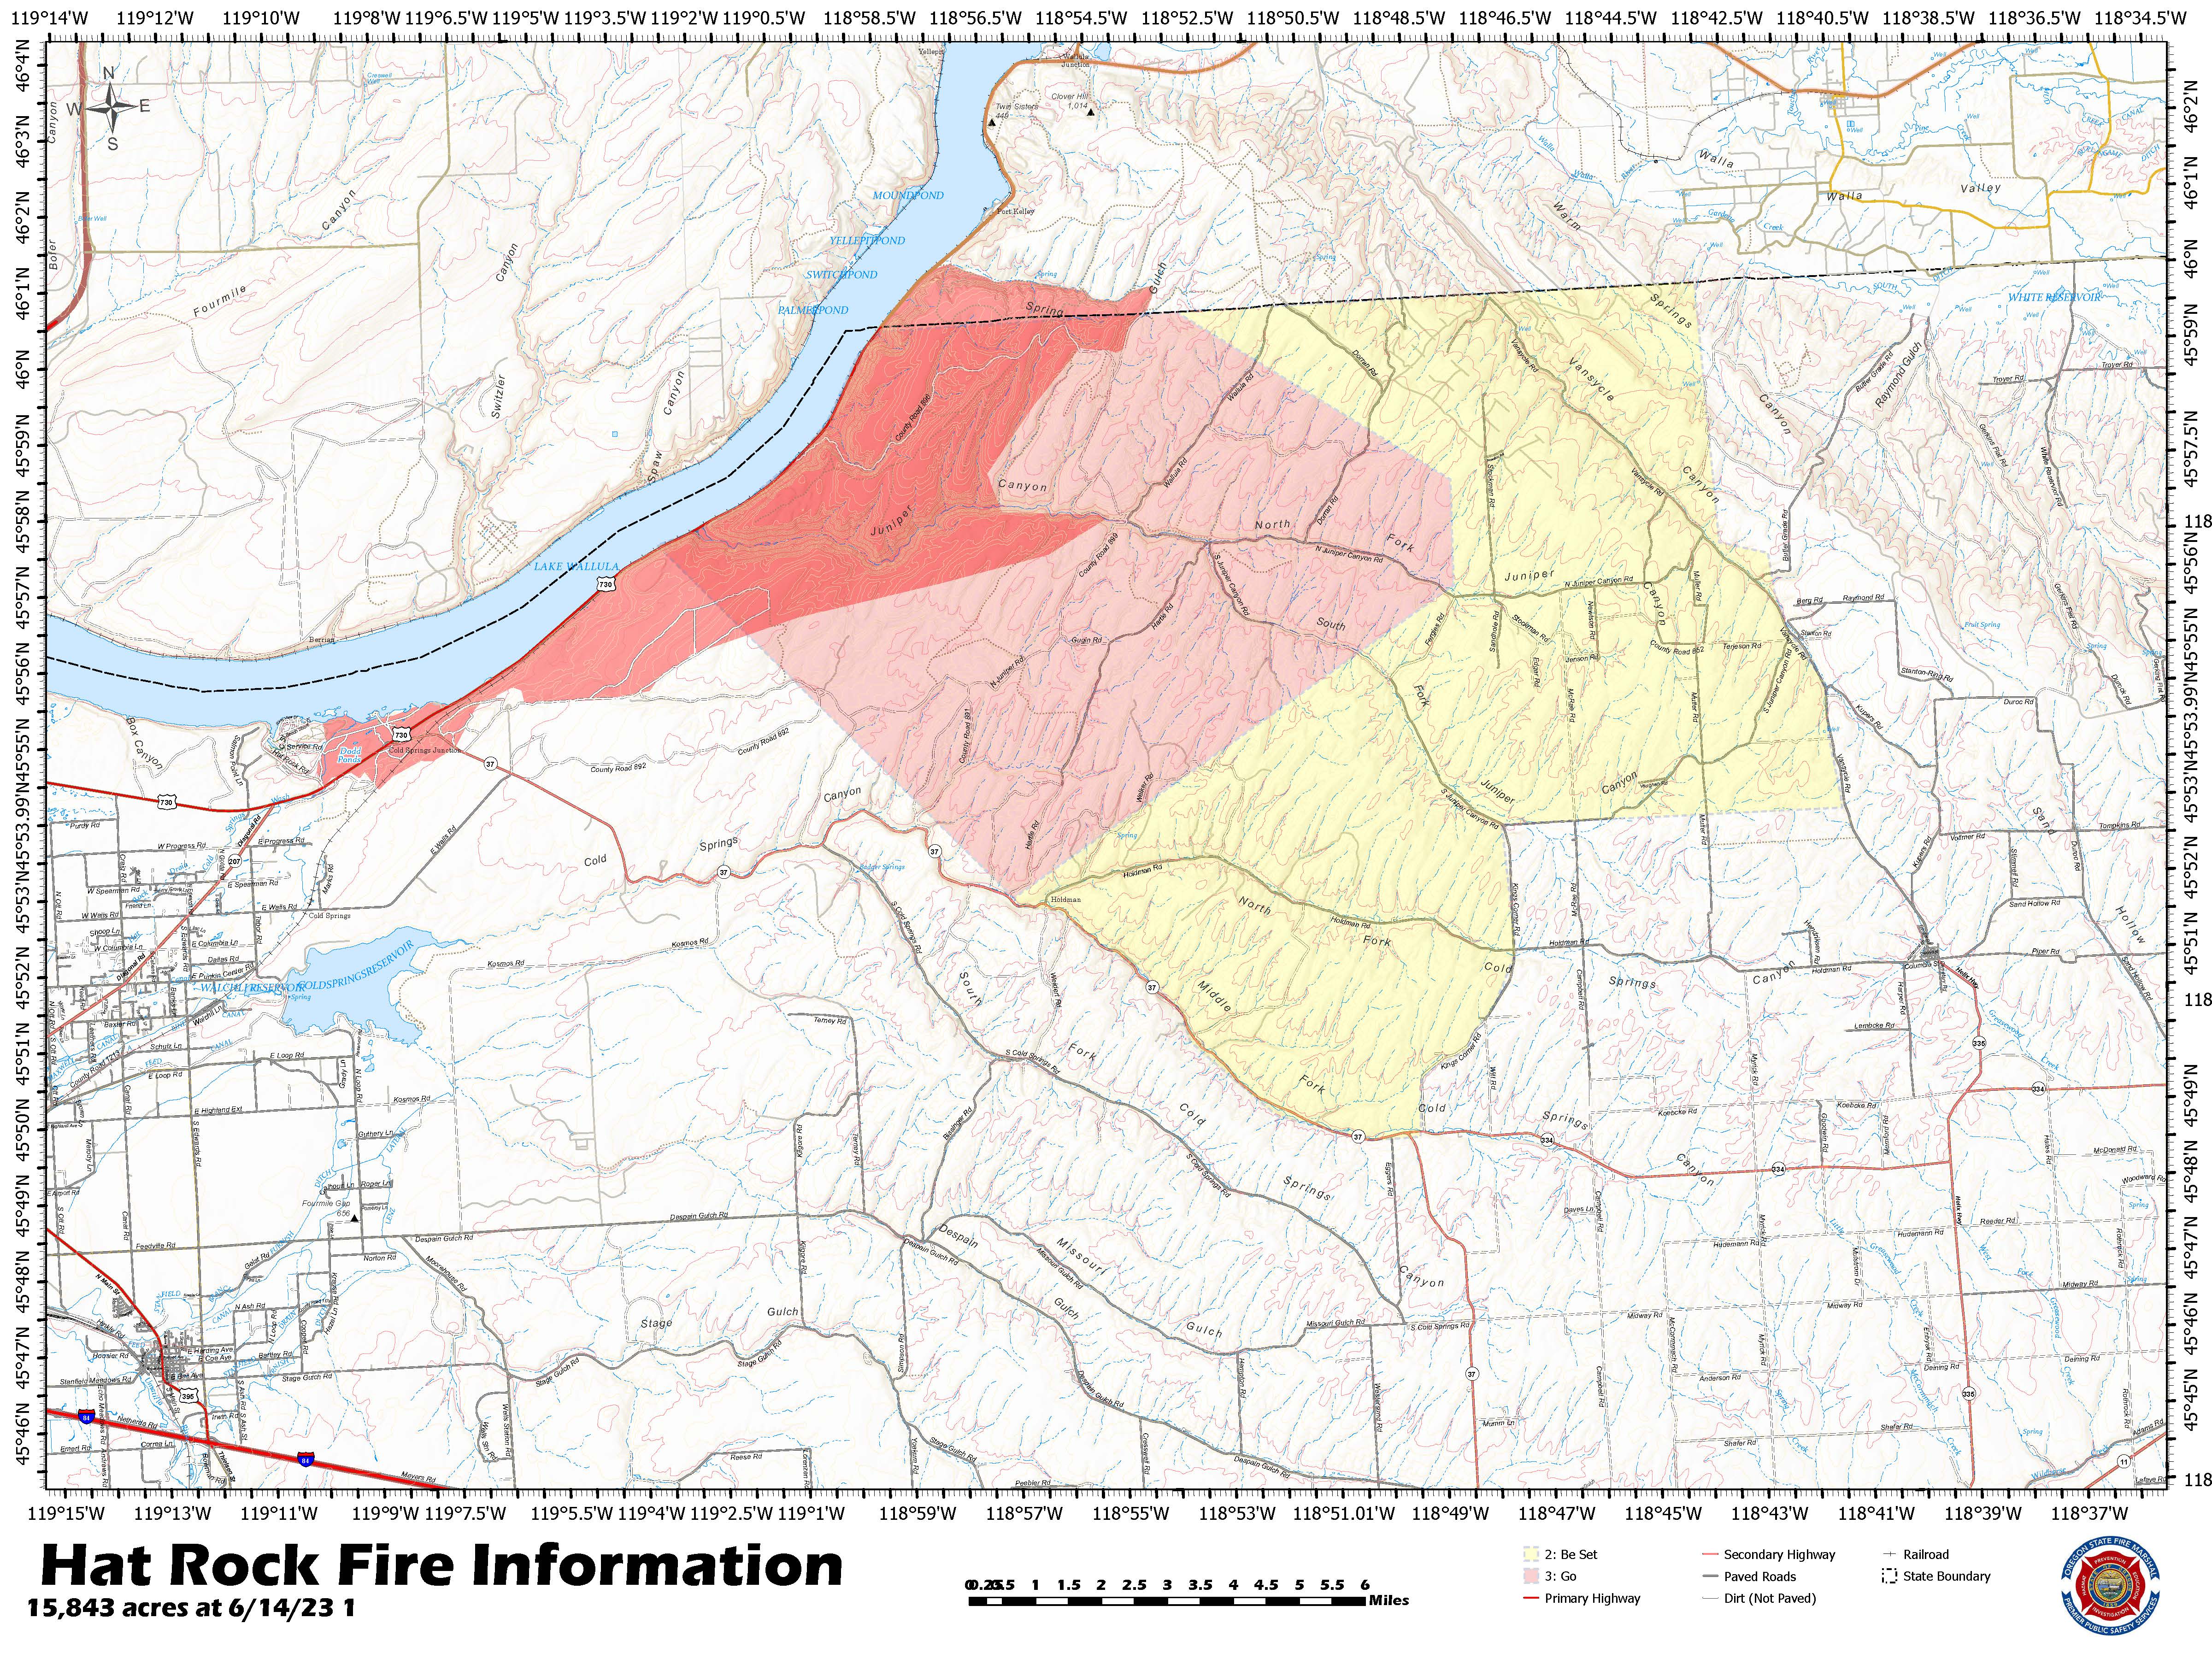 map showing northeast Oregon and the Hat Rock Fire perimeter. Evacuation levels are also depicted on the map.